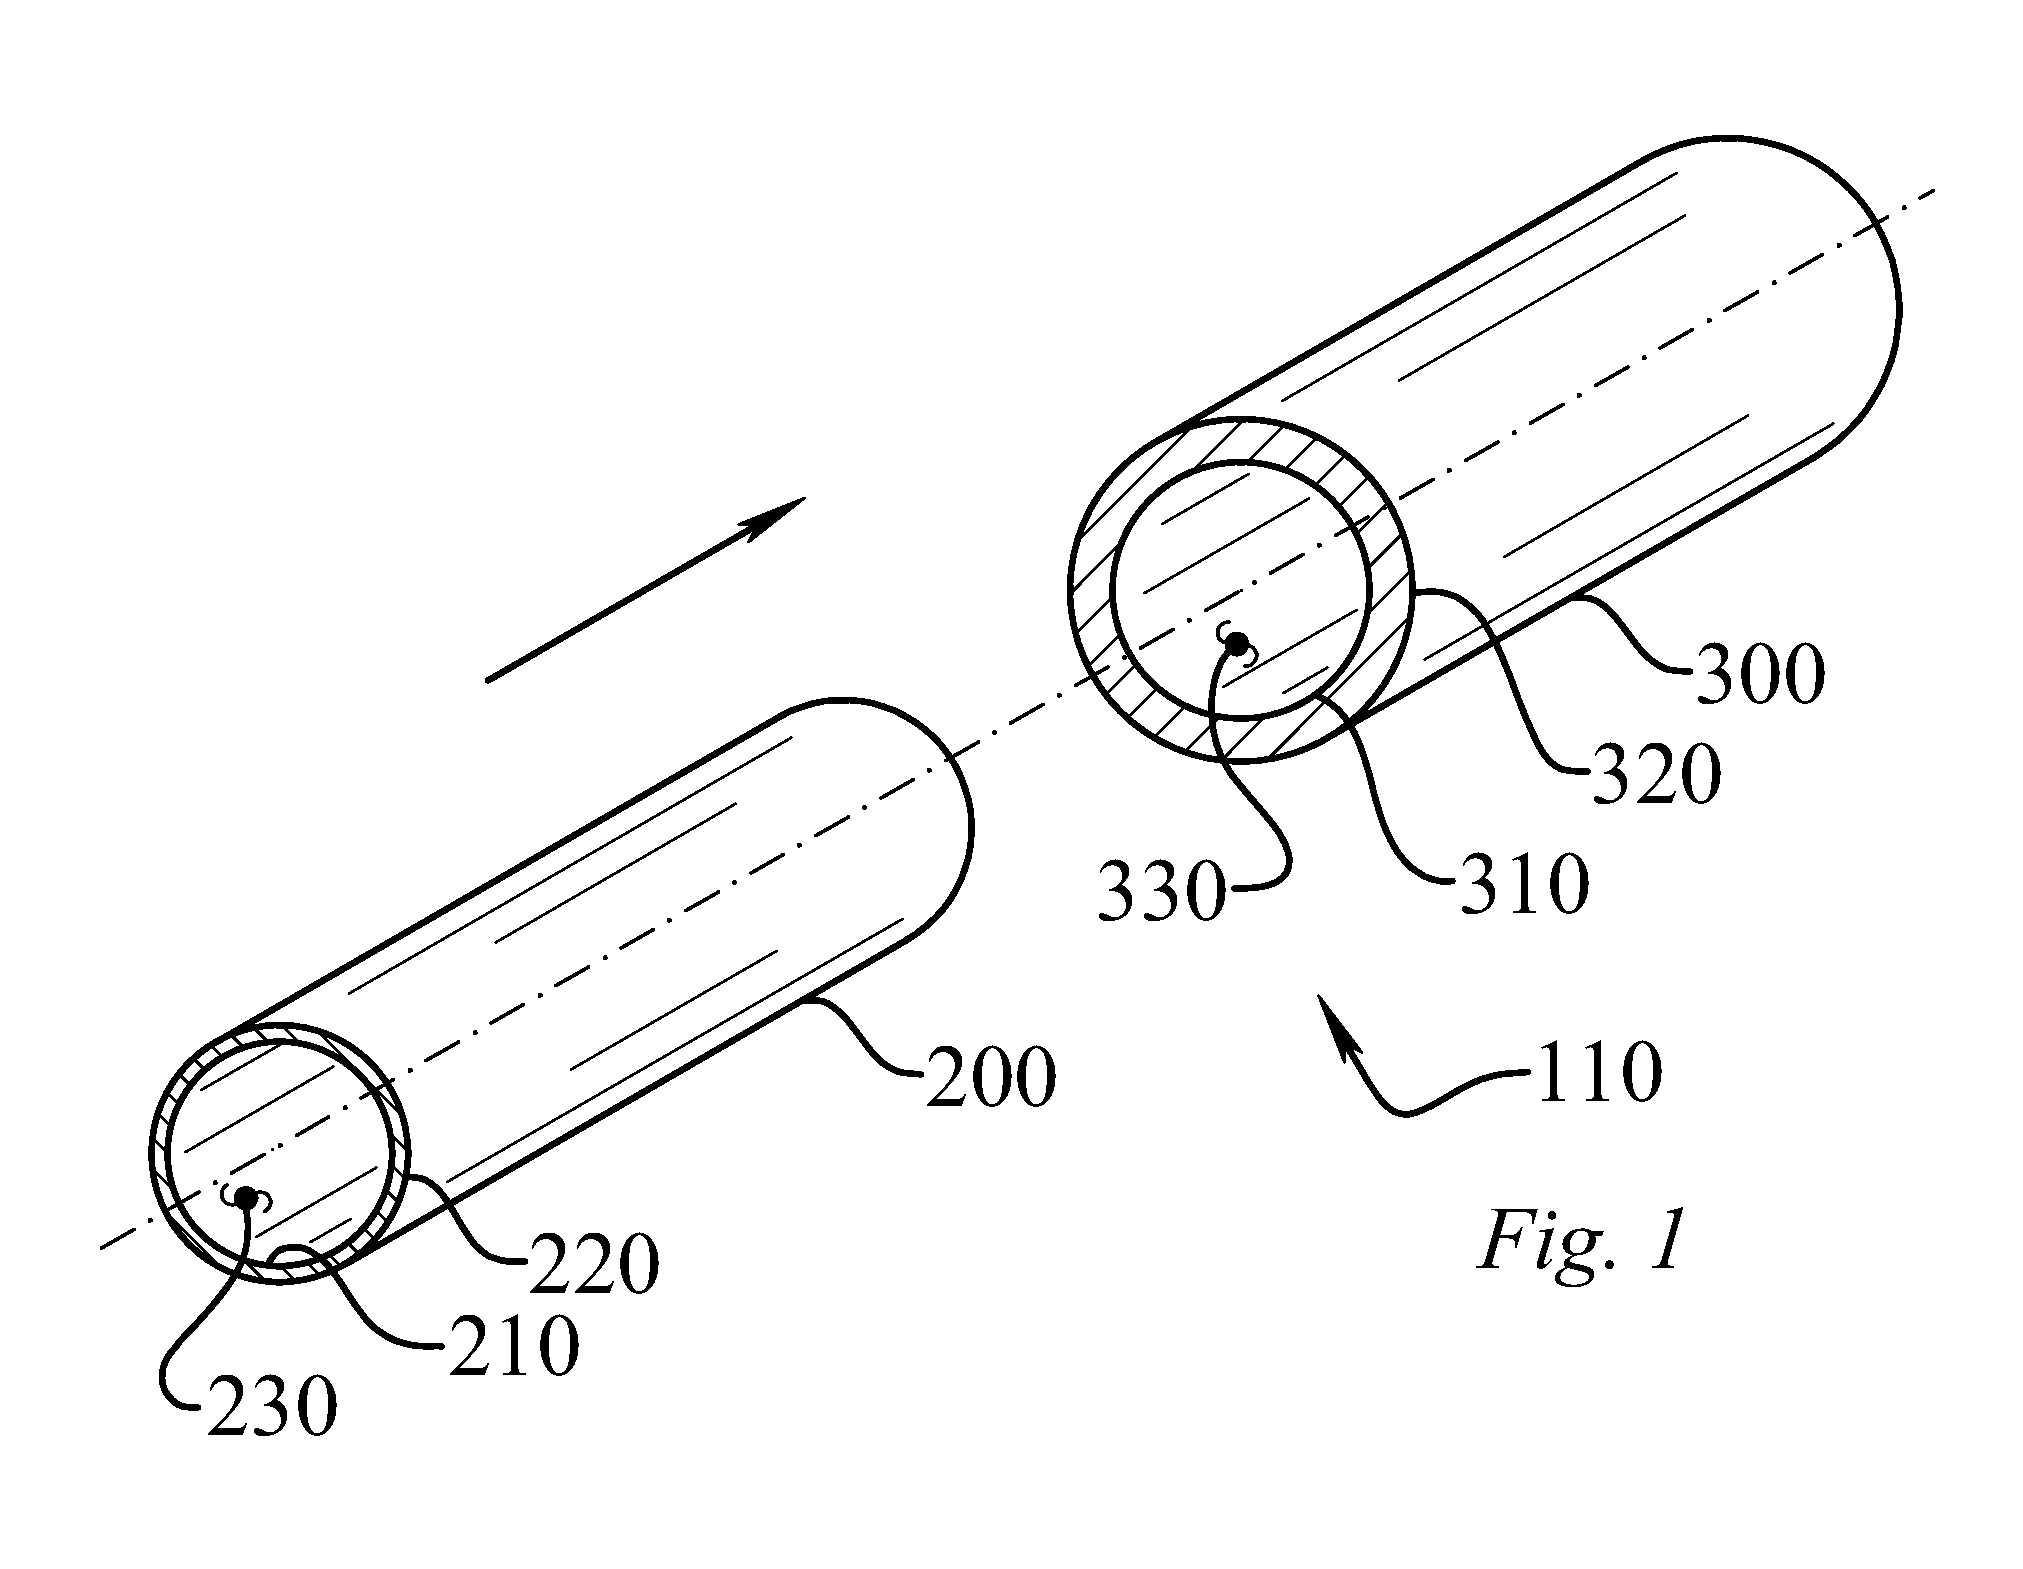 Method of creating a clad structure utilizing a moving resistance energy source